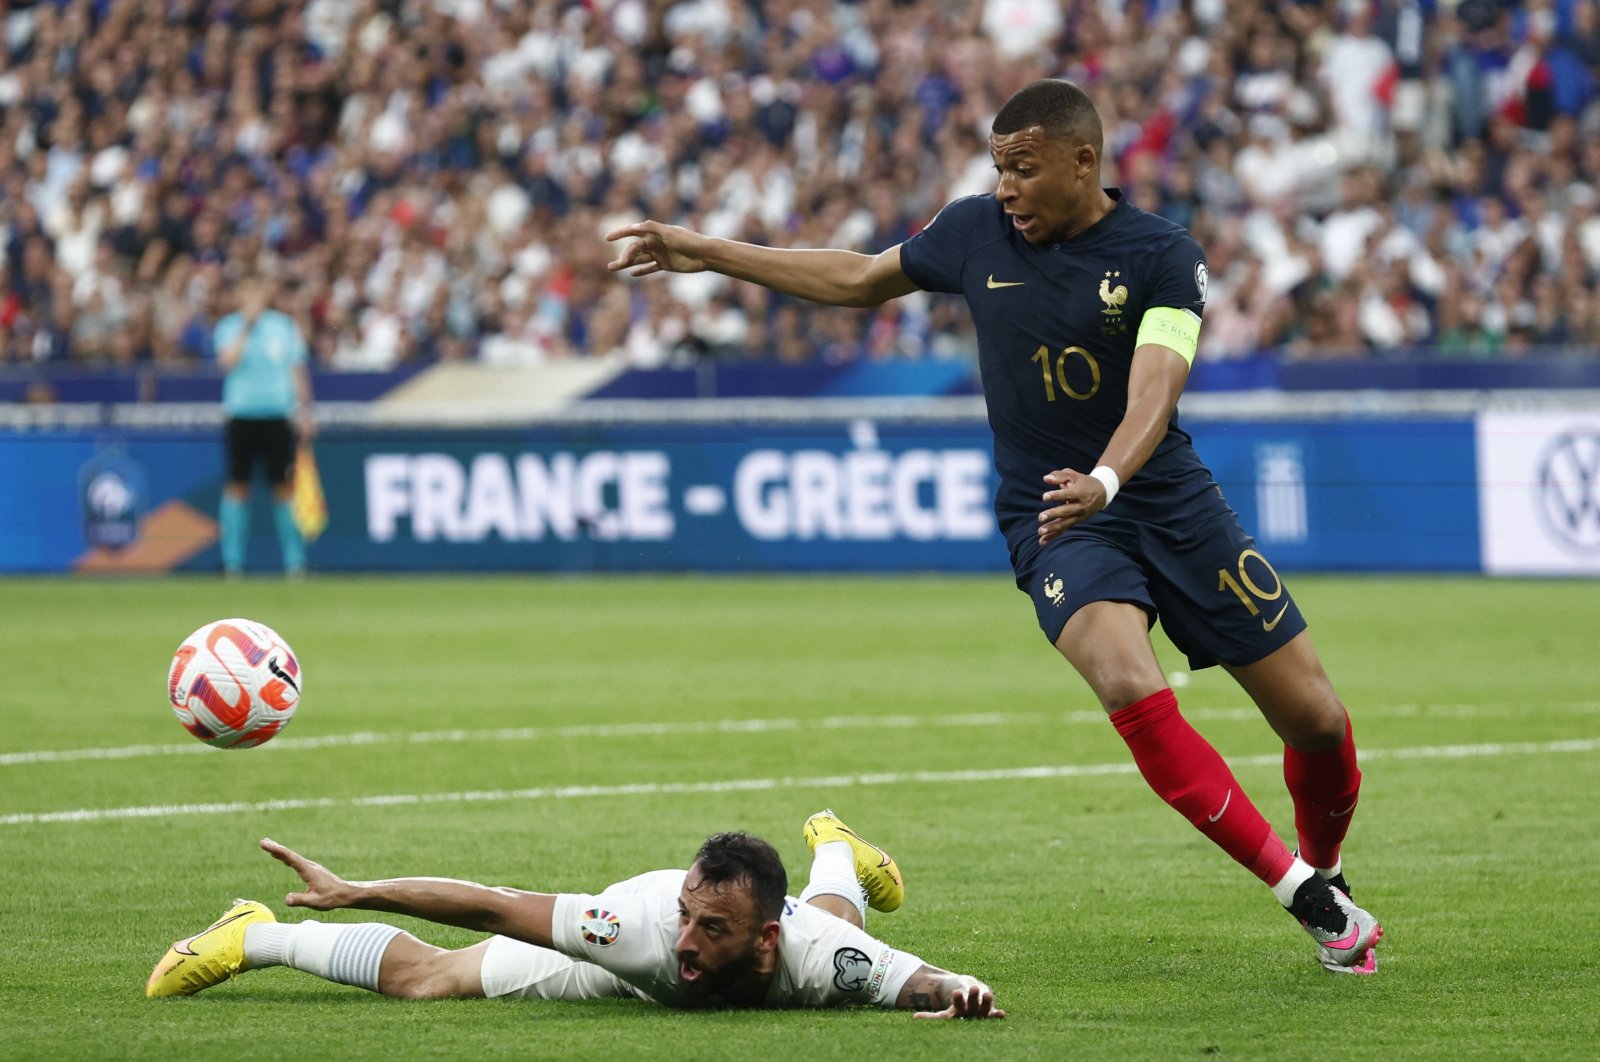 Mbappe penalty seals France’s Euros qualifiers victory over Greece